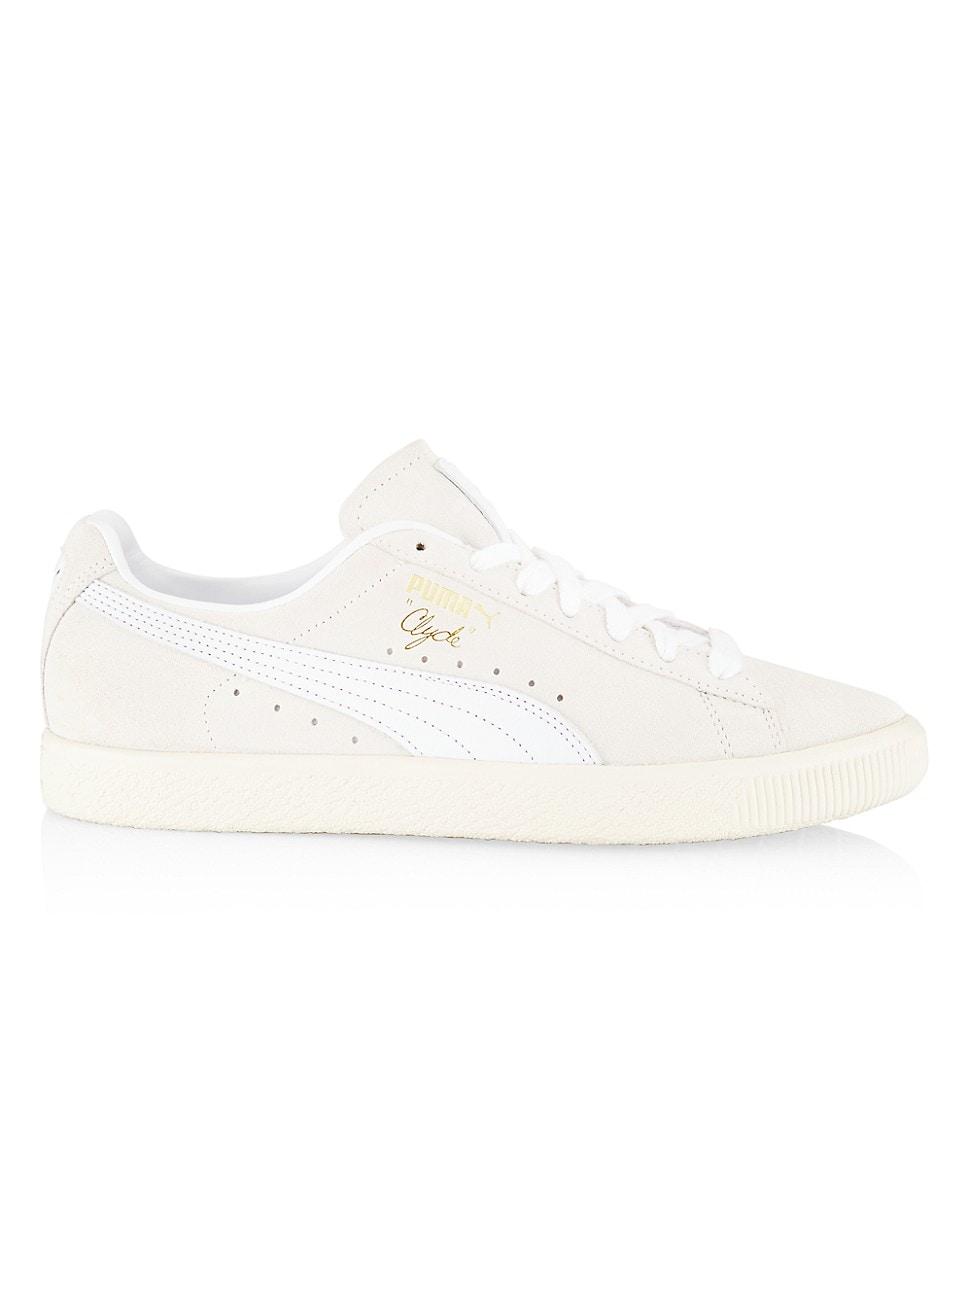 PUMA Clyde Prm Sneakers in White for Men | Lyst